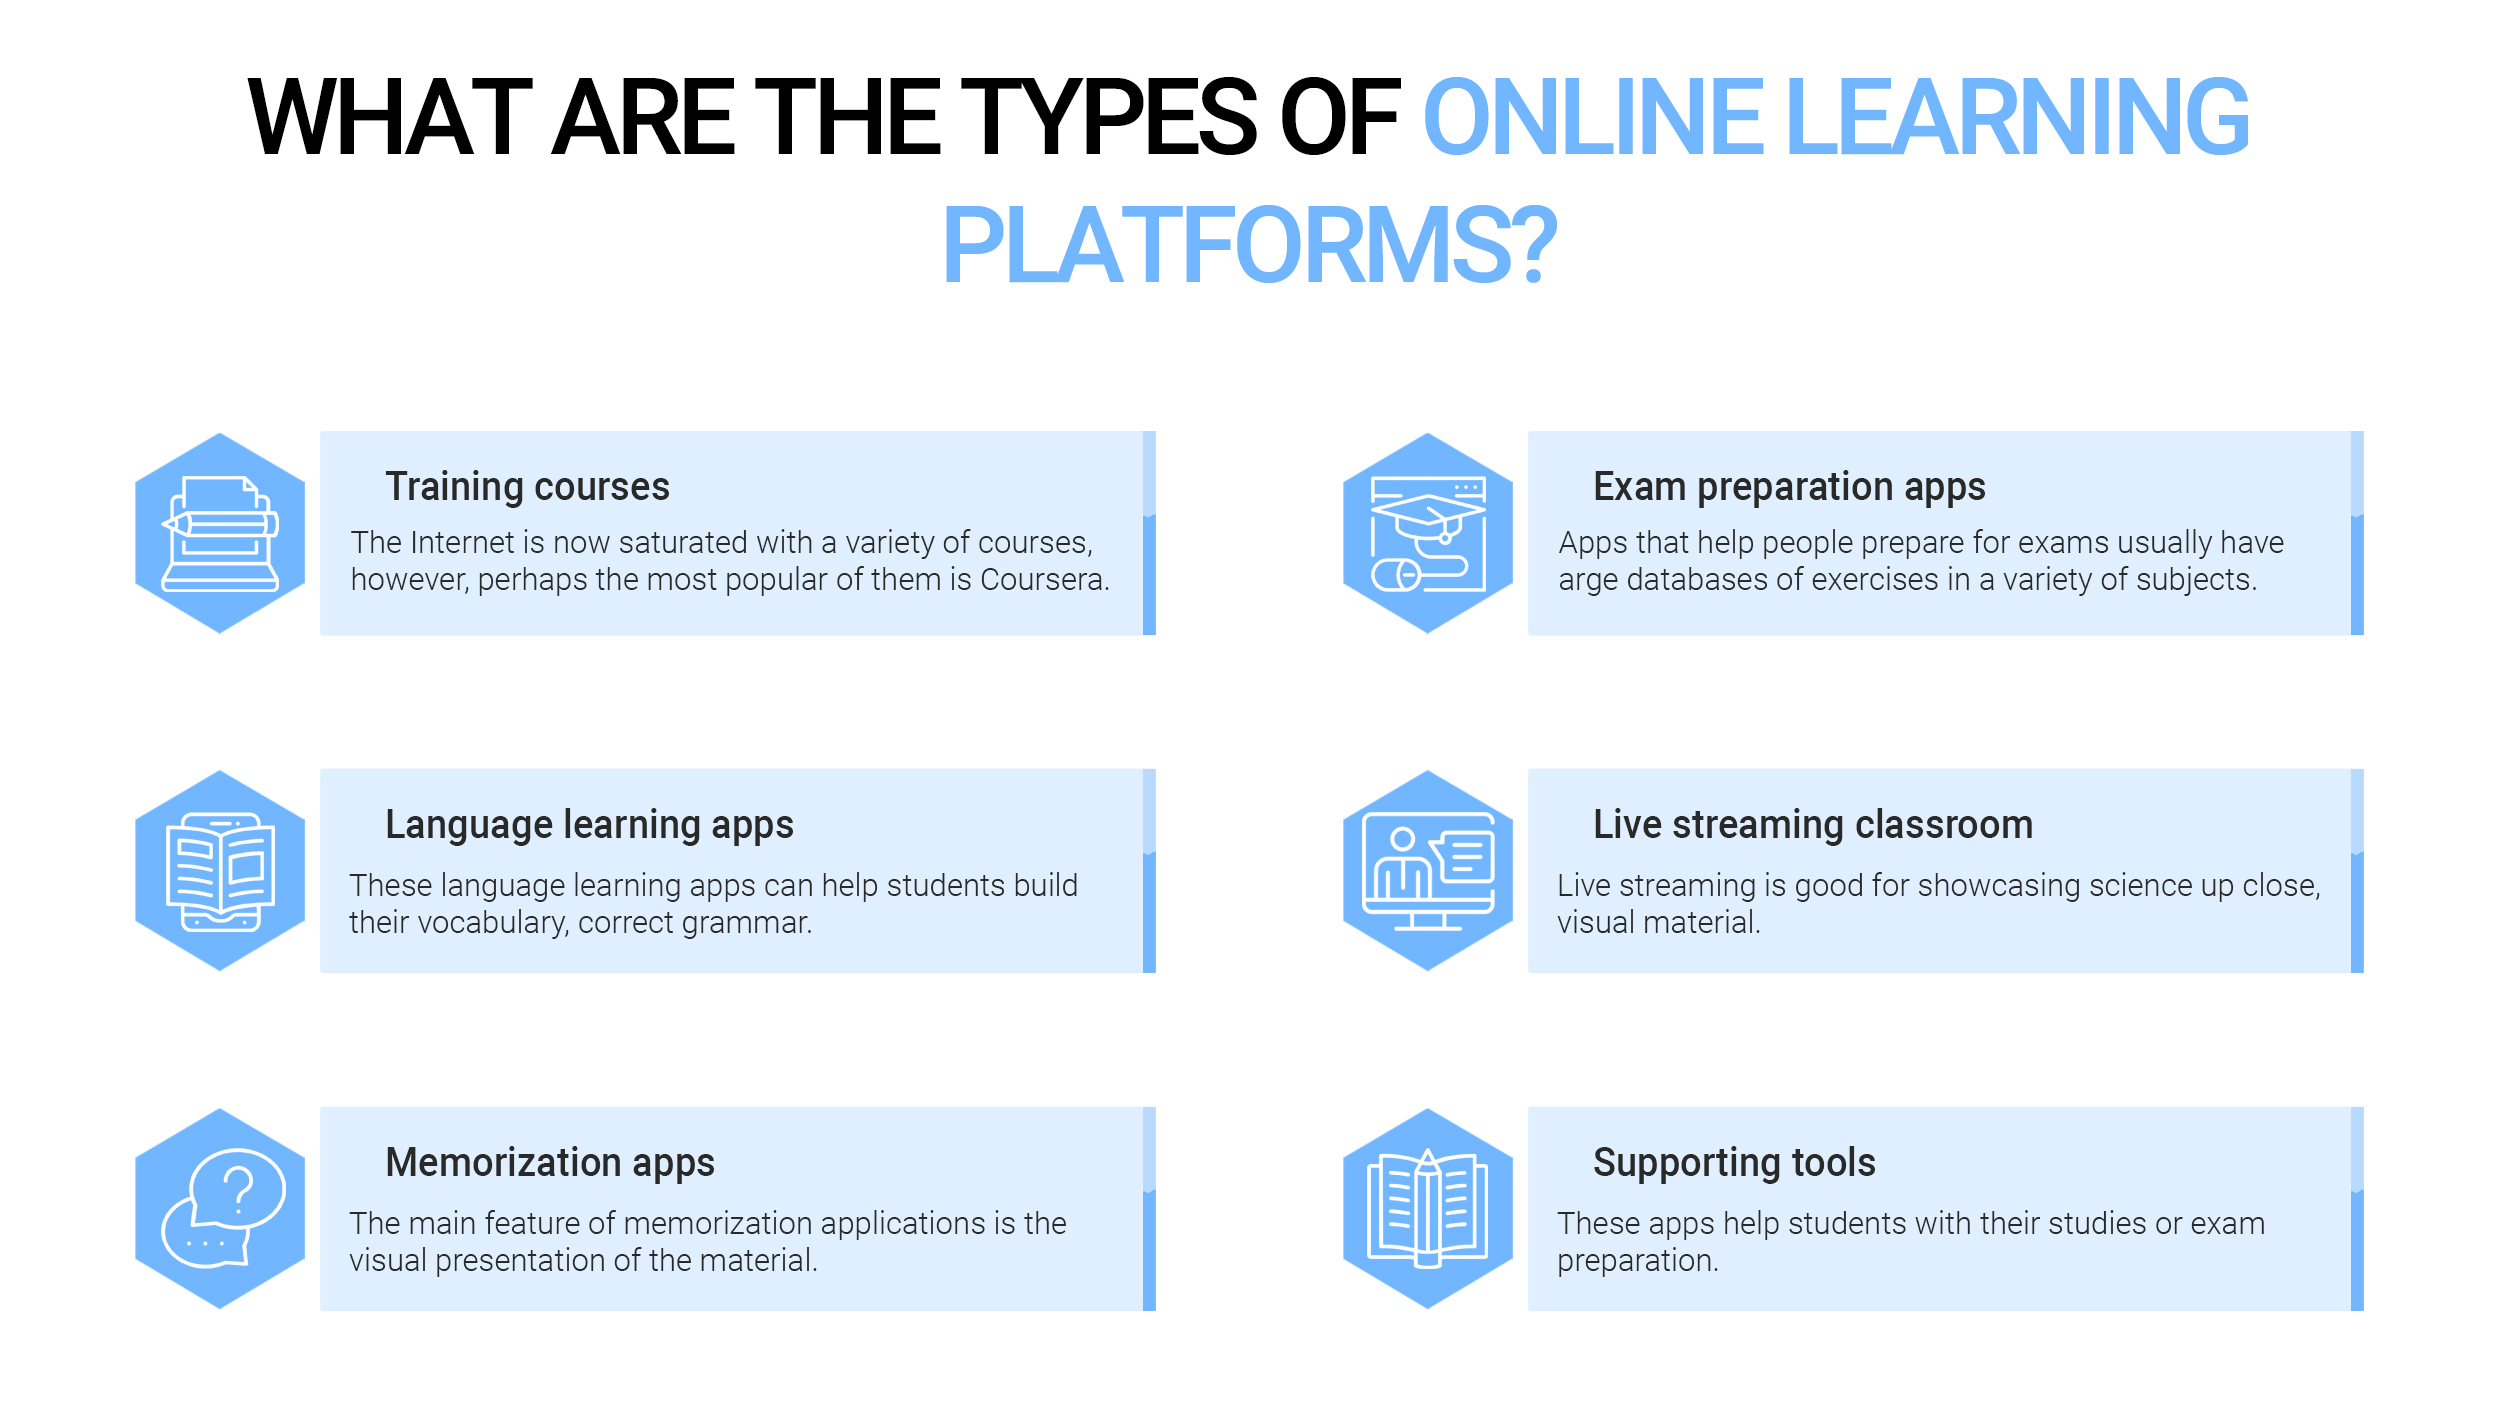 What Are the Types of Online Learning Platforms